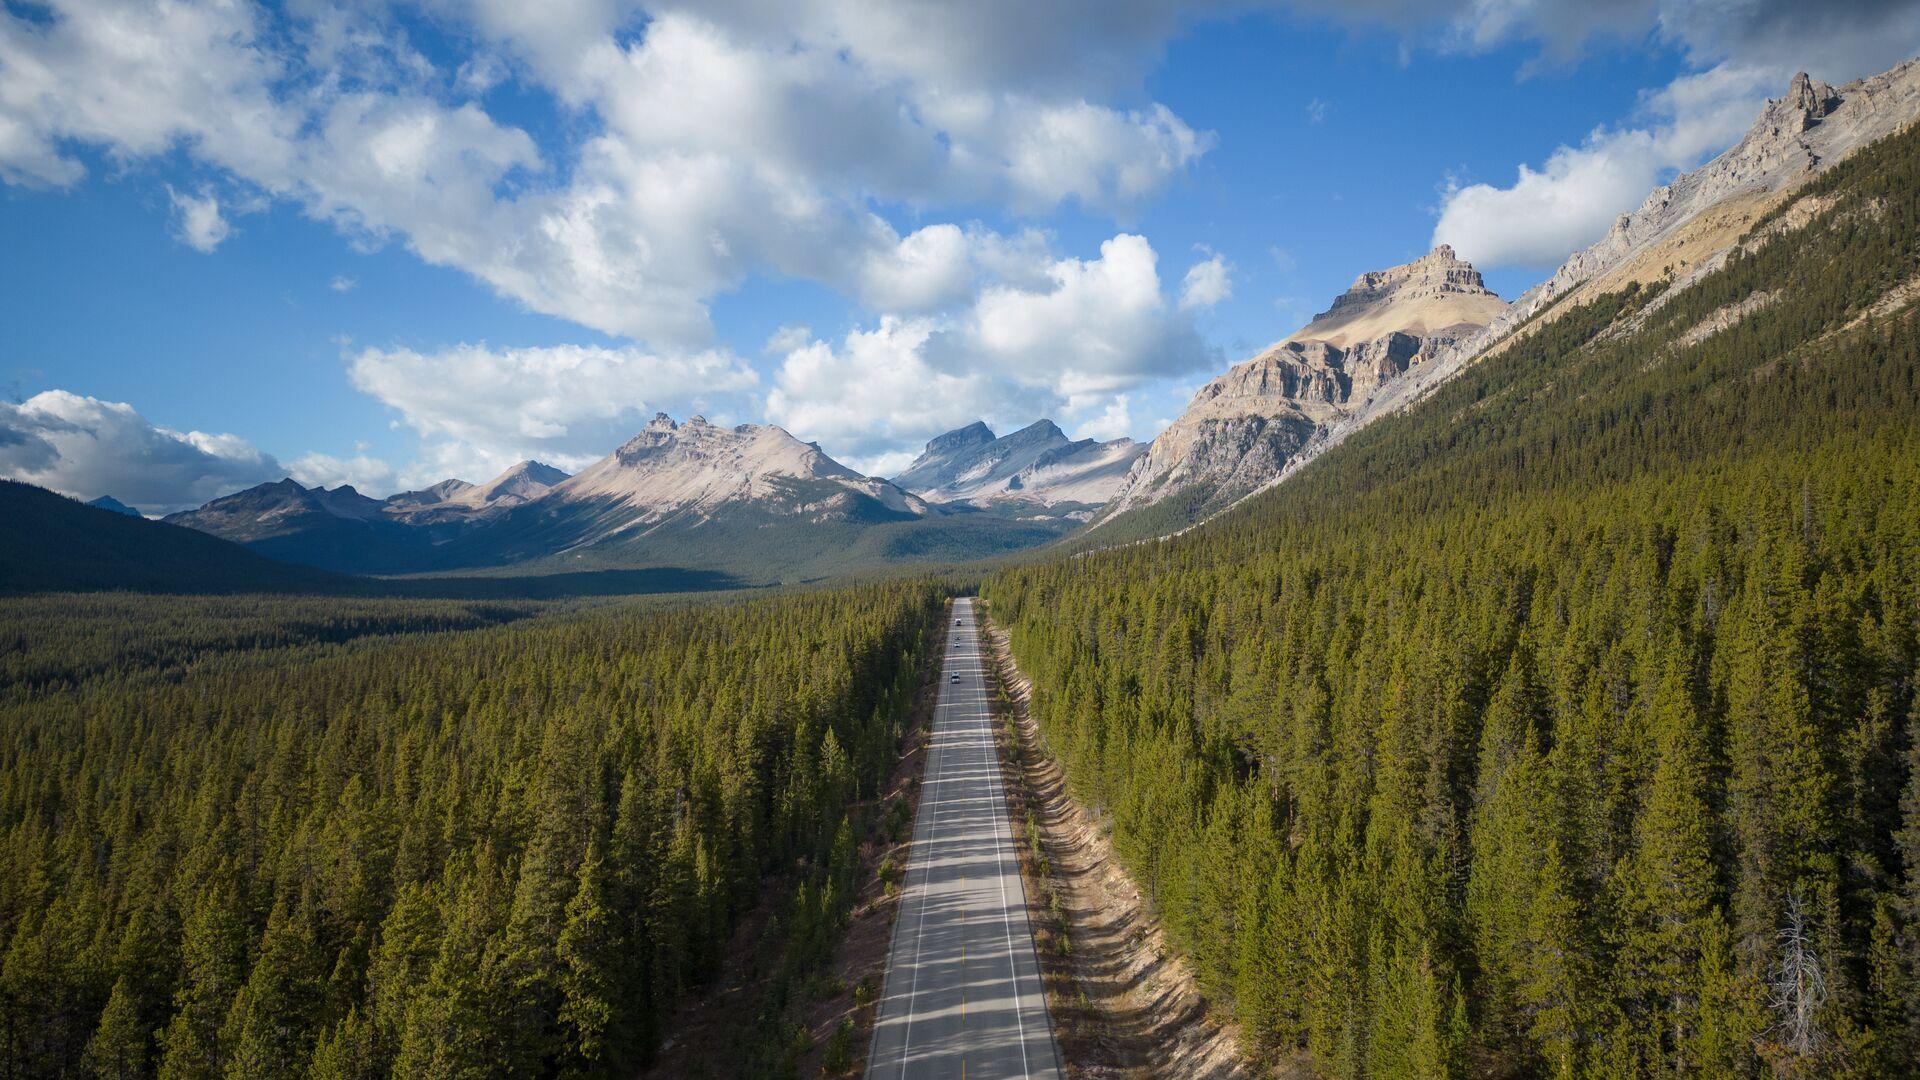 A road runs through a forest of evergreen trees with the Rocky Mountains in the background and a vast open sky above